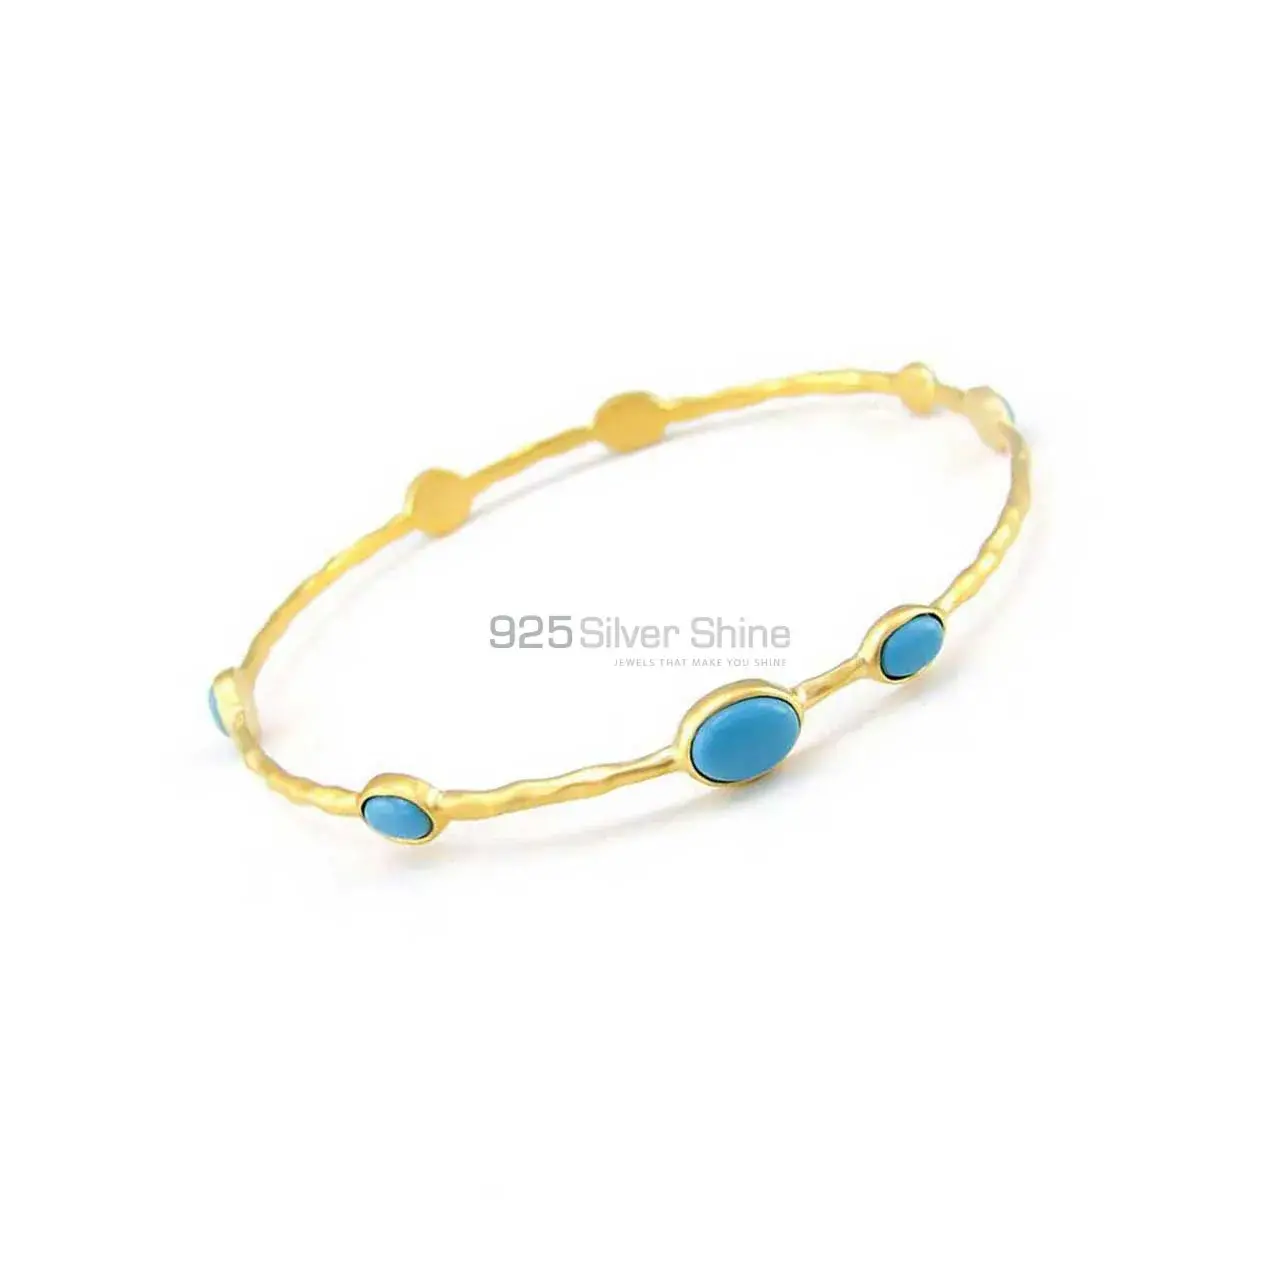 Wholesale Turquoise Gemstone Bracelet In 925 Silver Gold Plated 925SSB16_0